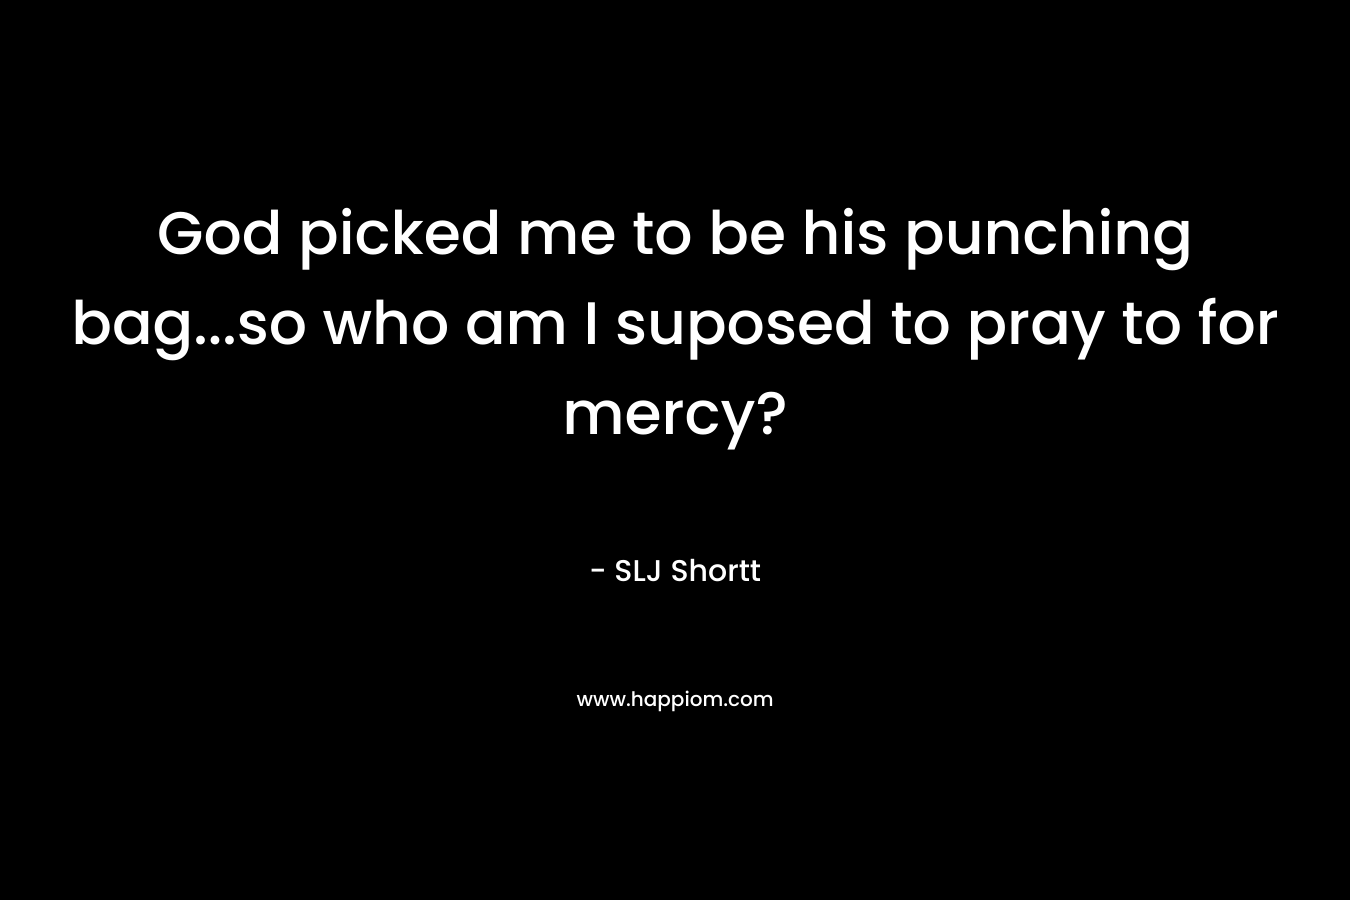 God picked me to be his punching bag...so who am I suposed to pray to for mercy?